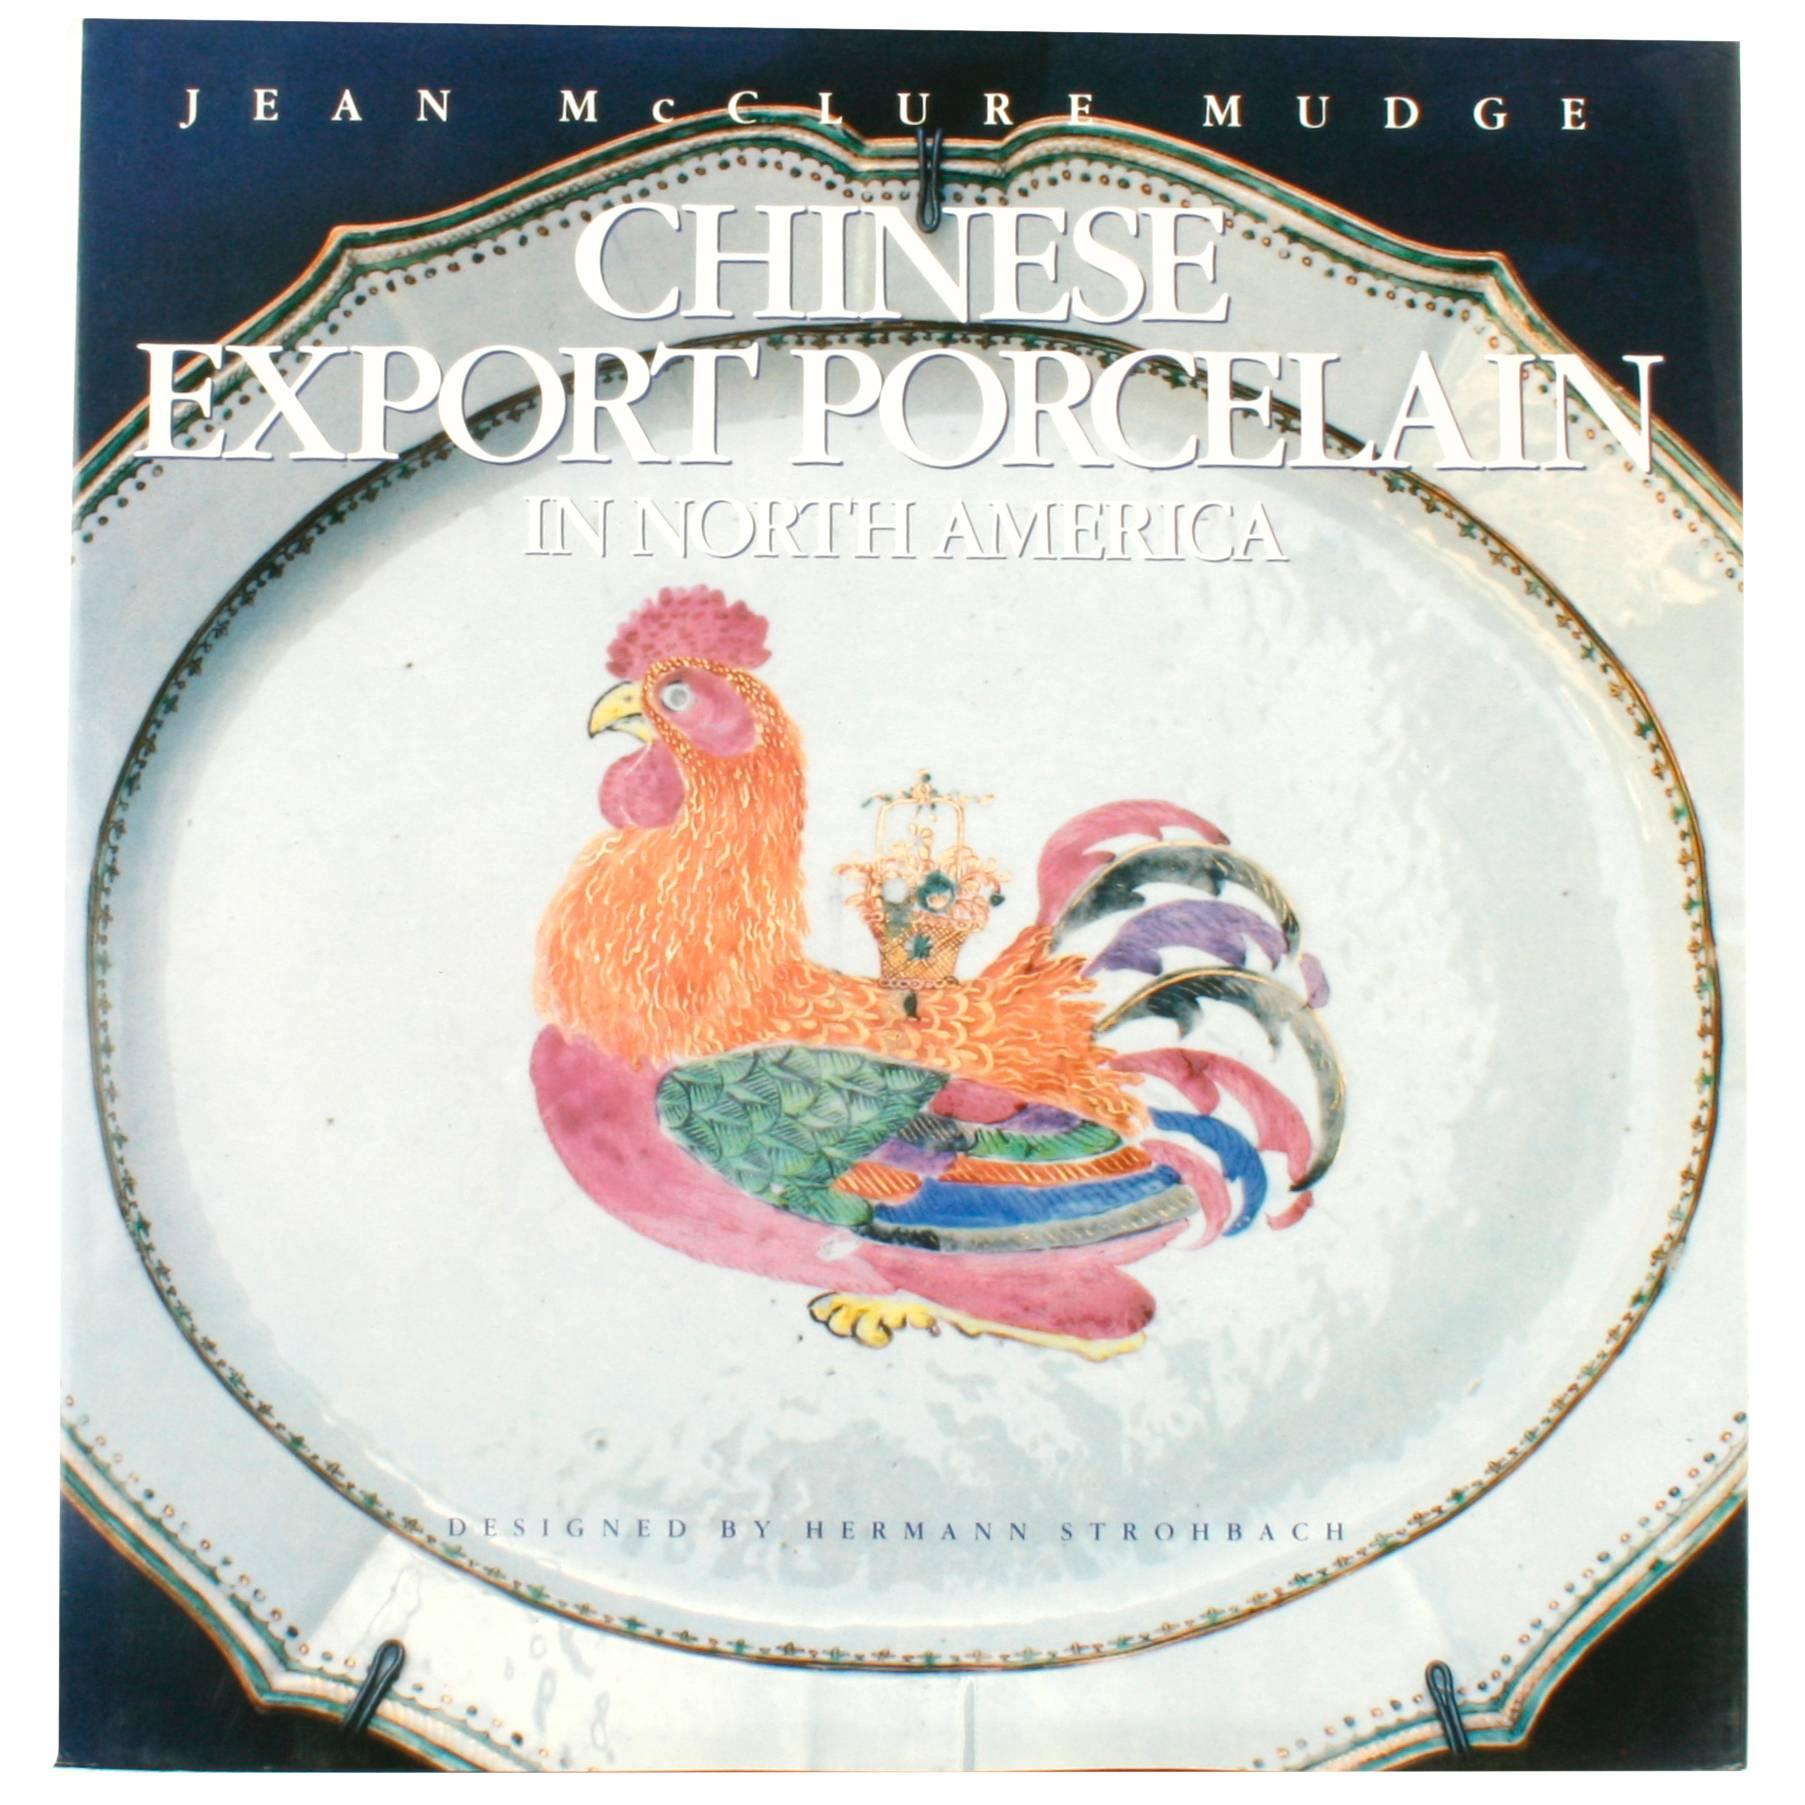 Chinese Export Porcelain in North America by Jean McClure Mudge, 1st Ed